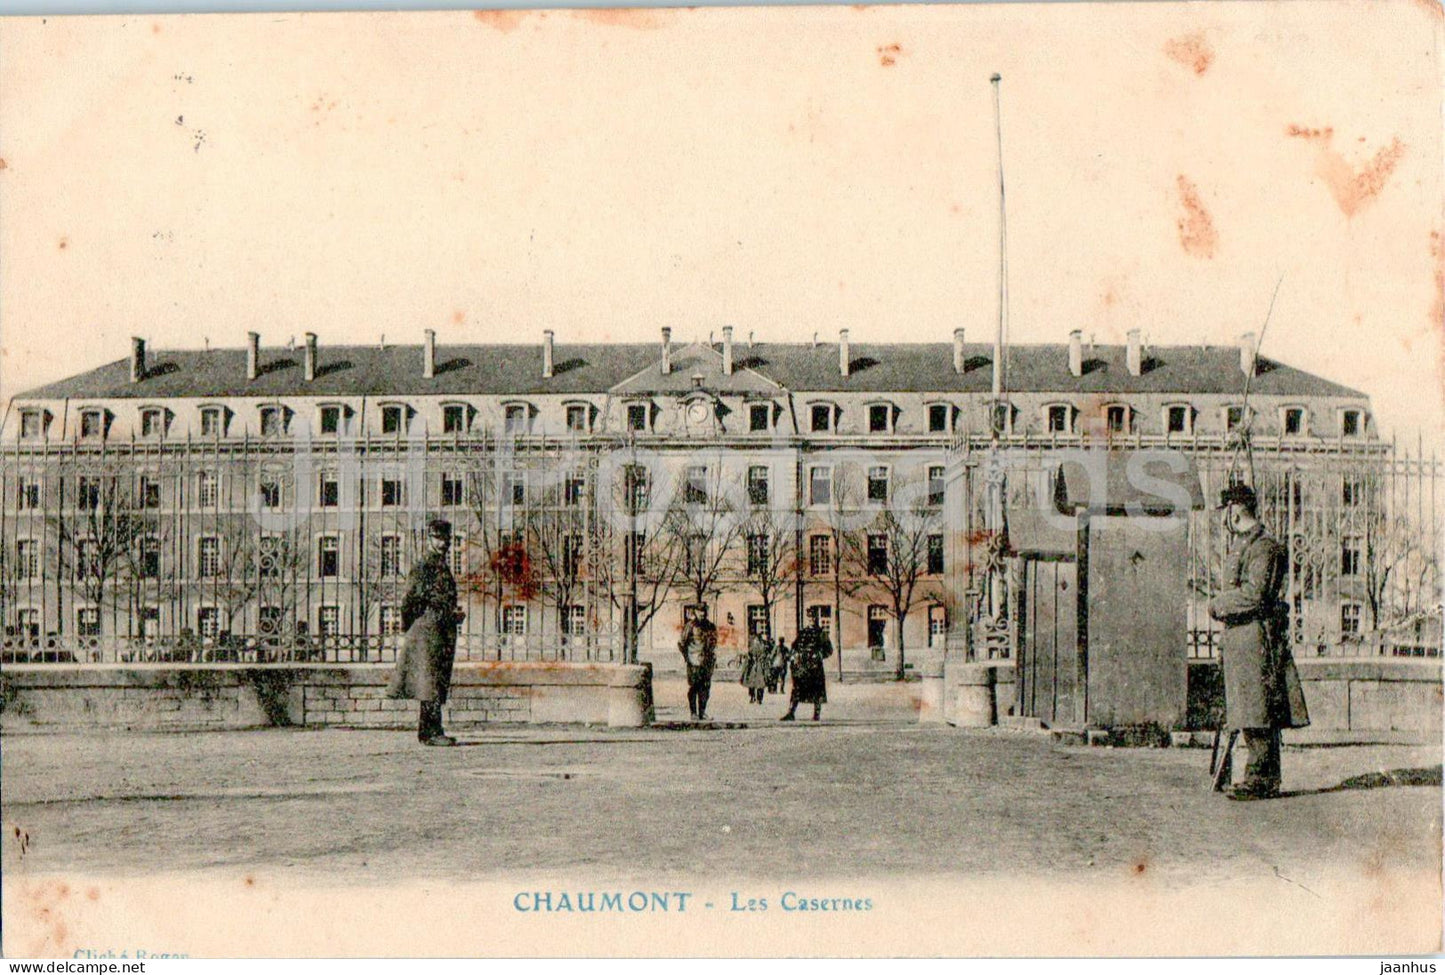 Chaumont - Les Caserners - the Barracks - military - old postcard - 1910 - France - used - JH Postcards